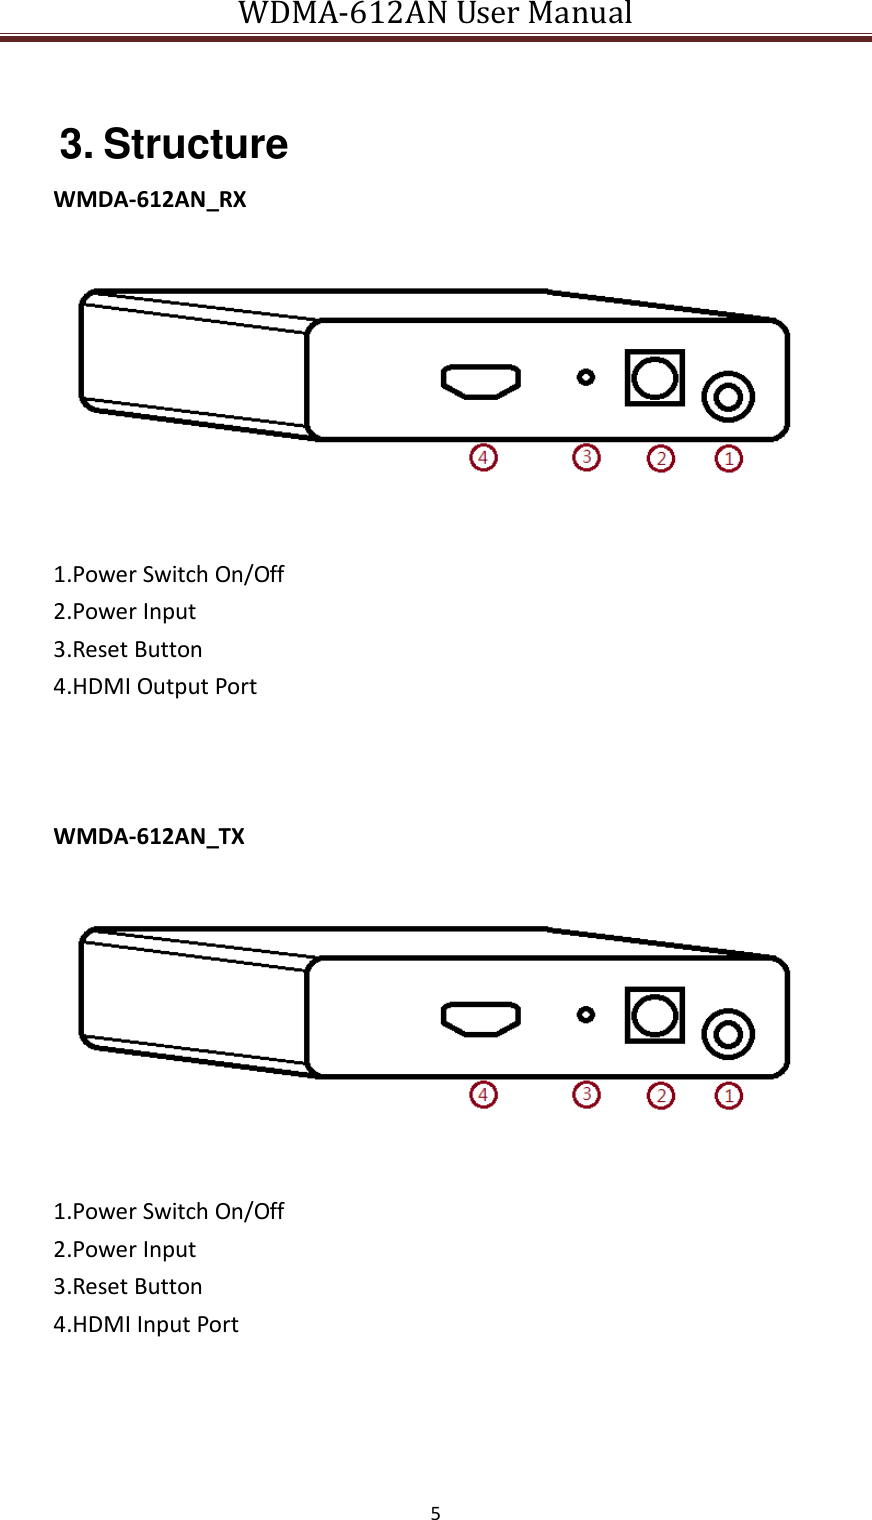 WDMA-612AN User Manual   5   3. Structure   WMDA-612AN_RX     1.Power Switch On/Off   2.Power Input   3.Reset Button   4.HDMI Output Port        WMDA-612AN_TX     1.Power Switch On/Off   2.Power Input   3.Reset Button   4.HDMI Input Port     